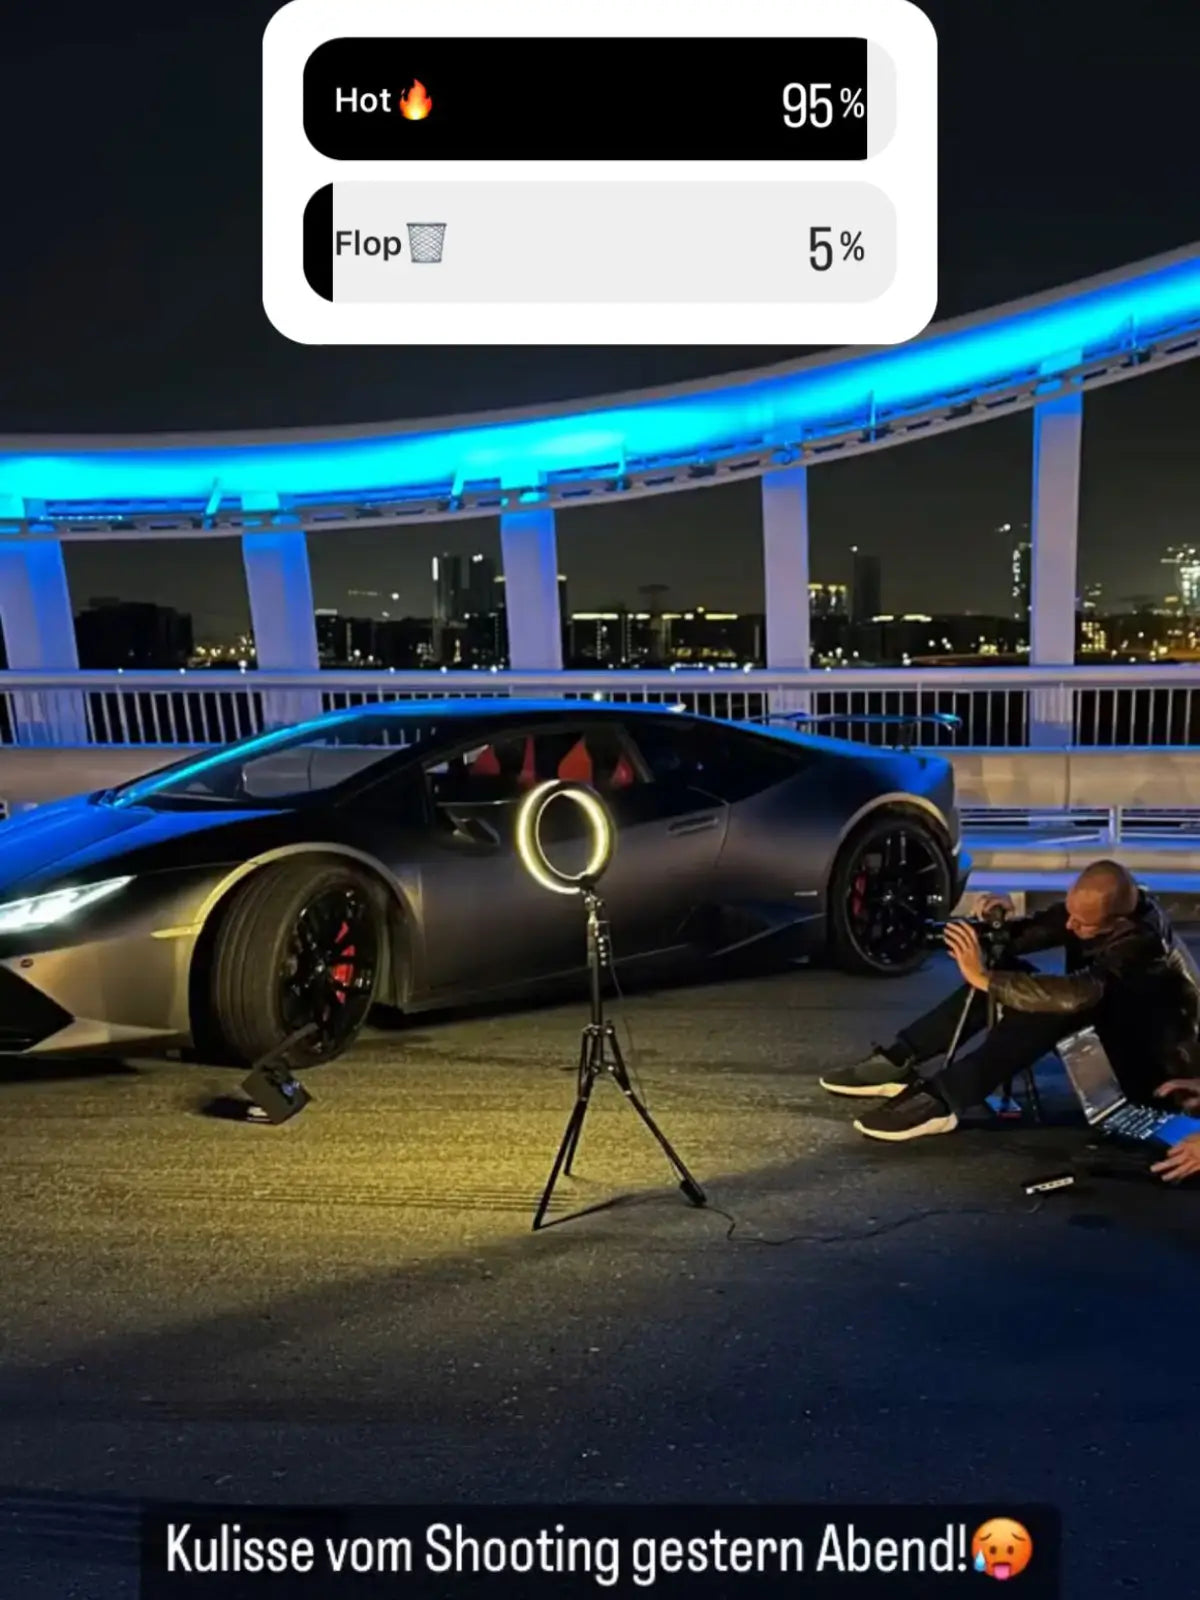 A behind-the-scenes view from a recent photo shoot held at night. The focus is on a sleek sports car under a bridge with blue lighting, while a photographer is capturing the moment with a camera on a tripod. The setting suggests an urban environment, possibly highlighting luxury and style, much like DriftElement’s approach to creating watches with an innovative rim design, indicative of the German startup’s unique and cutting-edge product design.